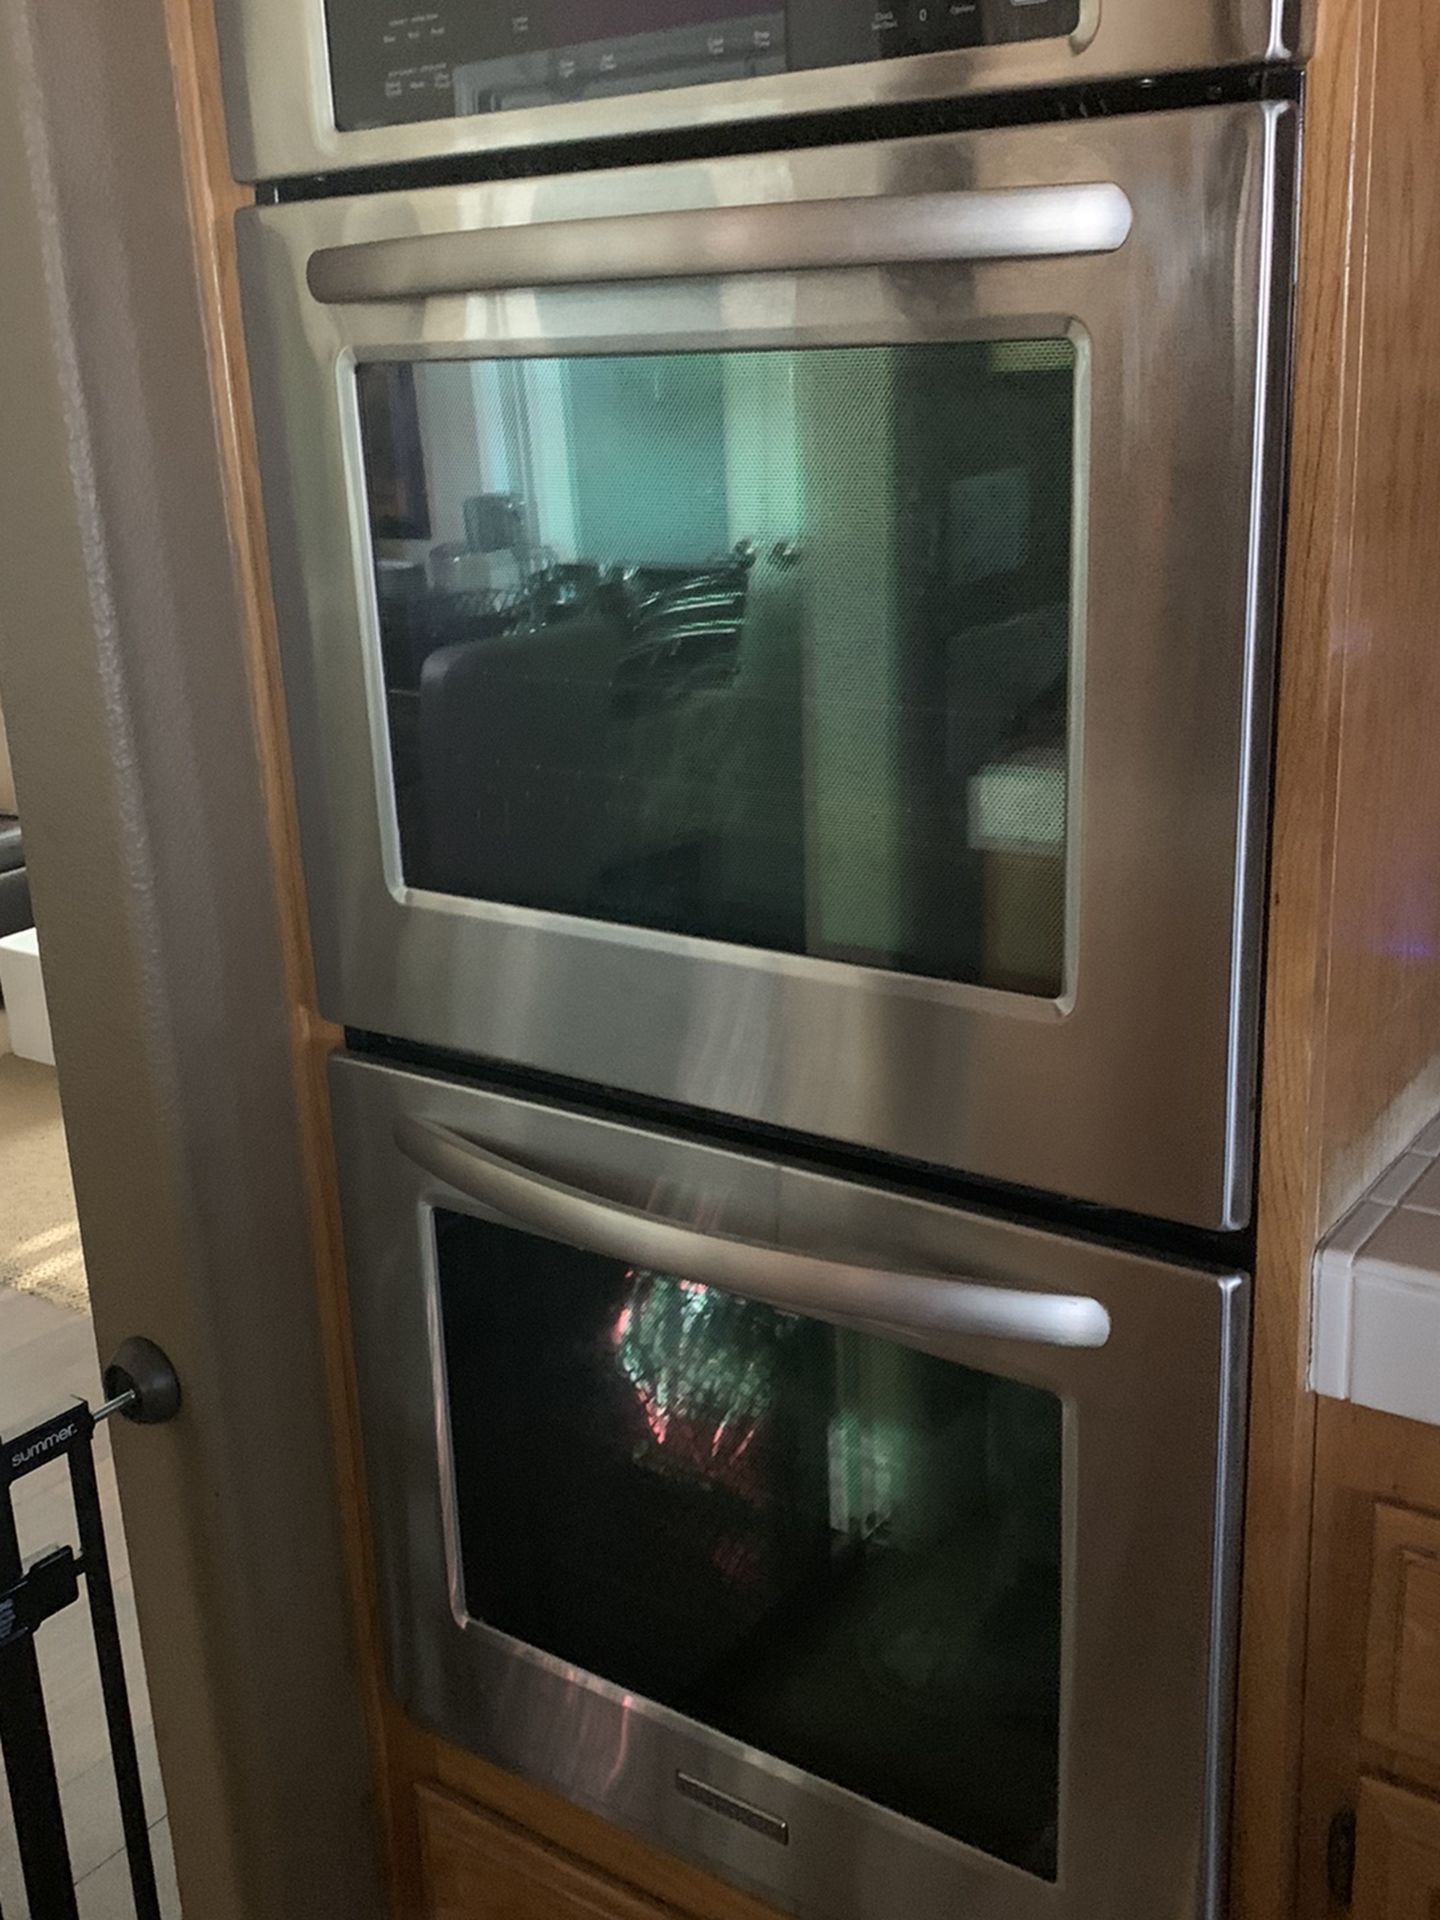 Double Oven Kitchen Aid